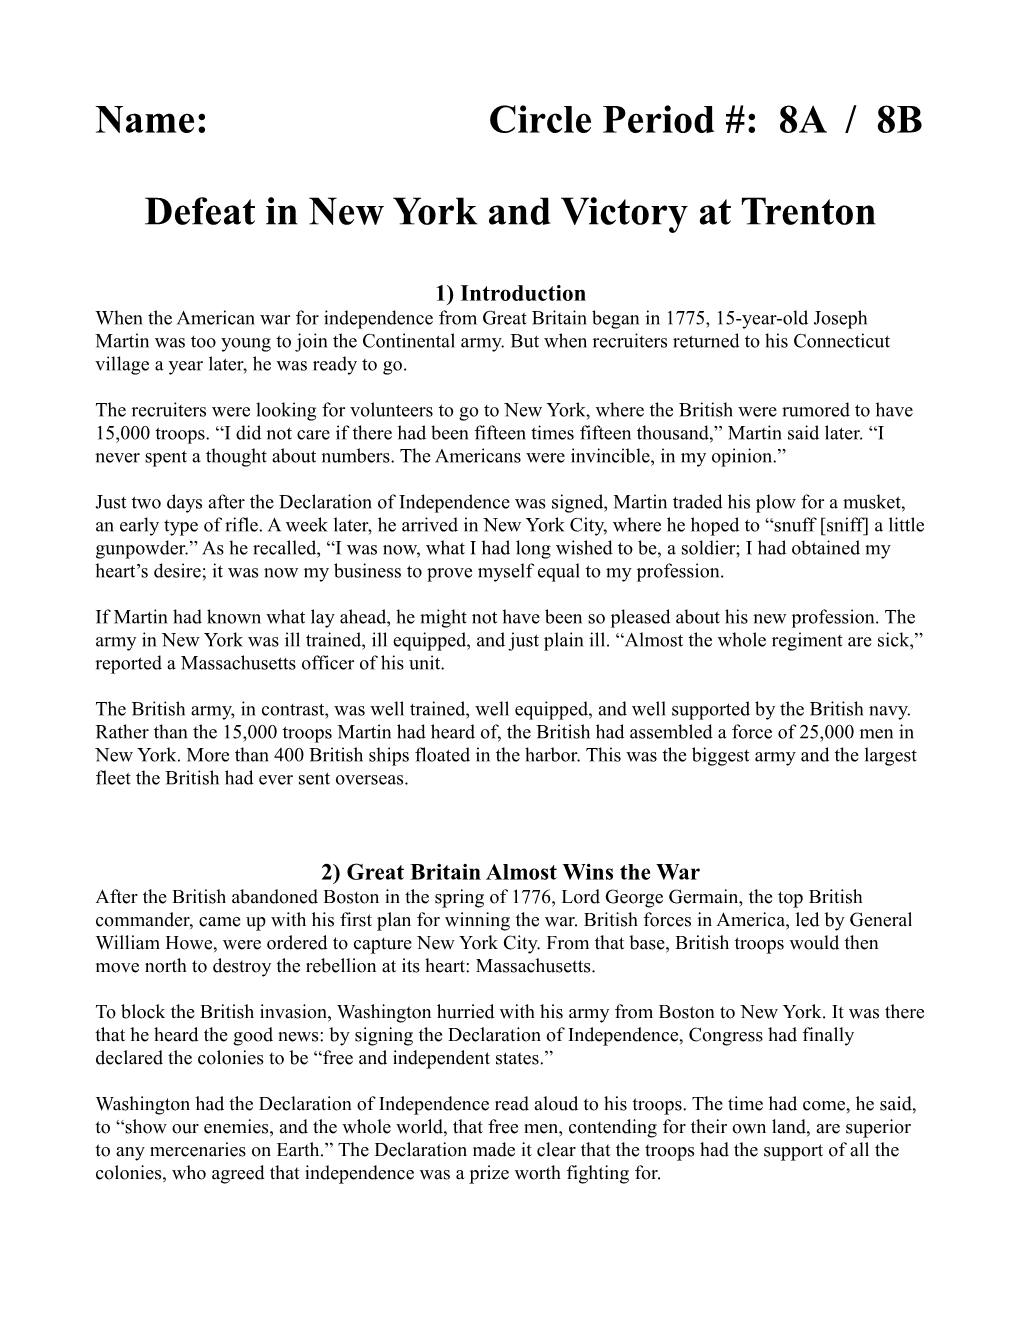 Defeat in New York and Victory at Trenton